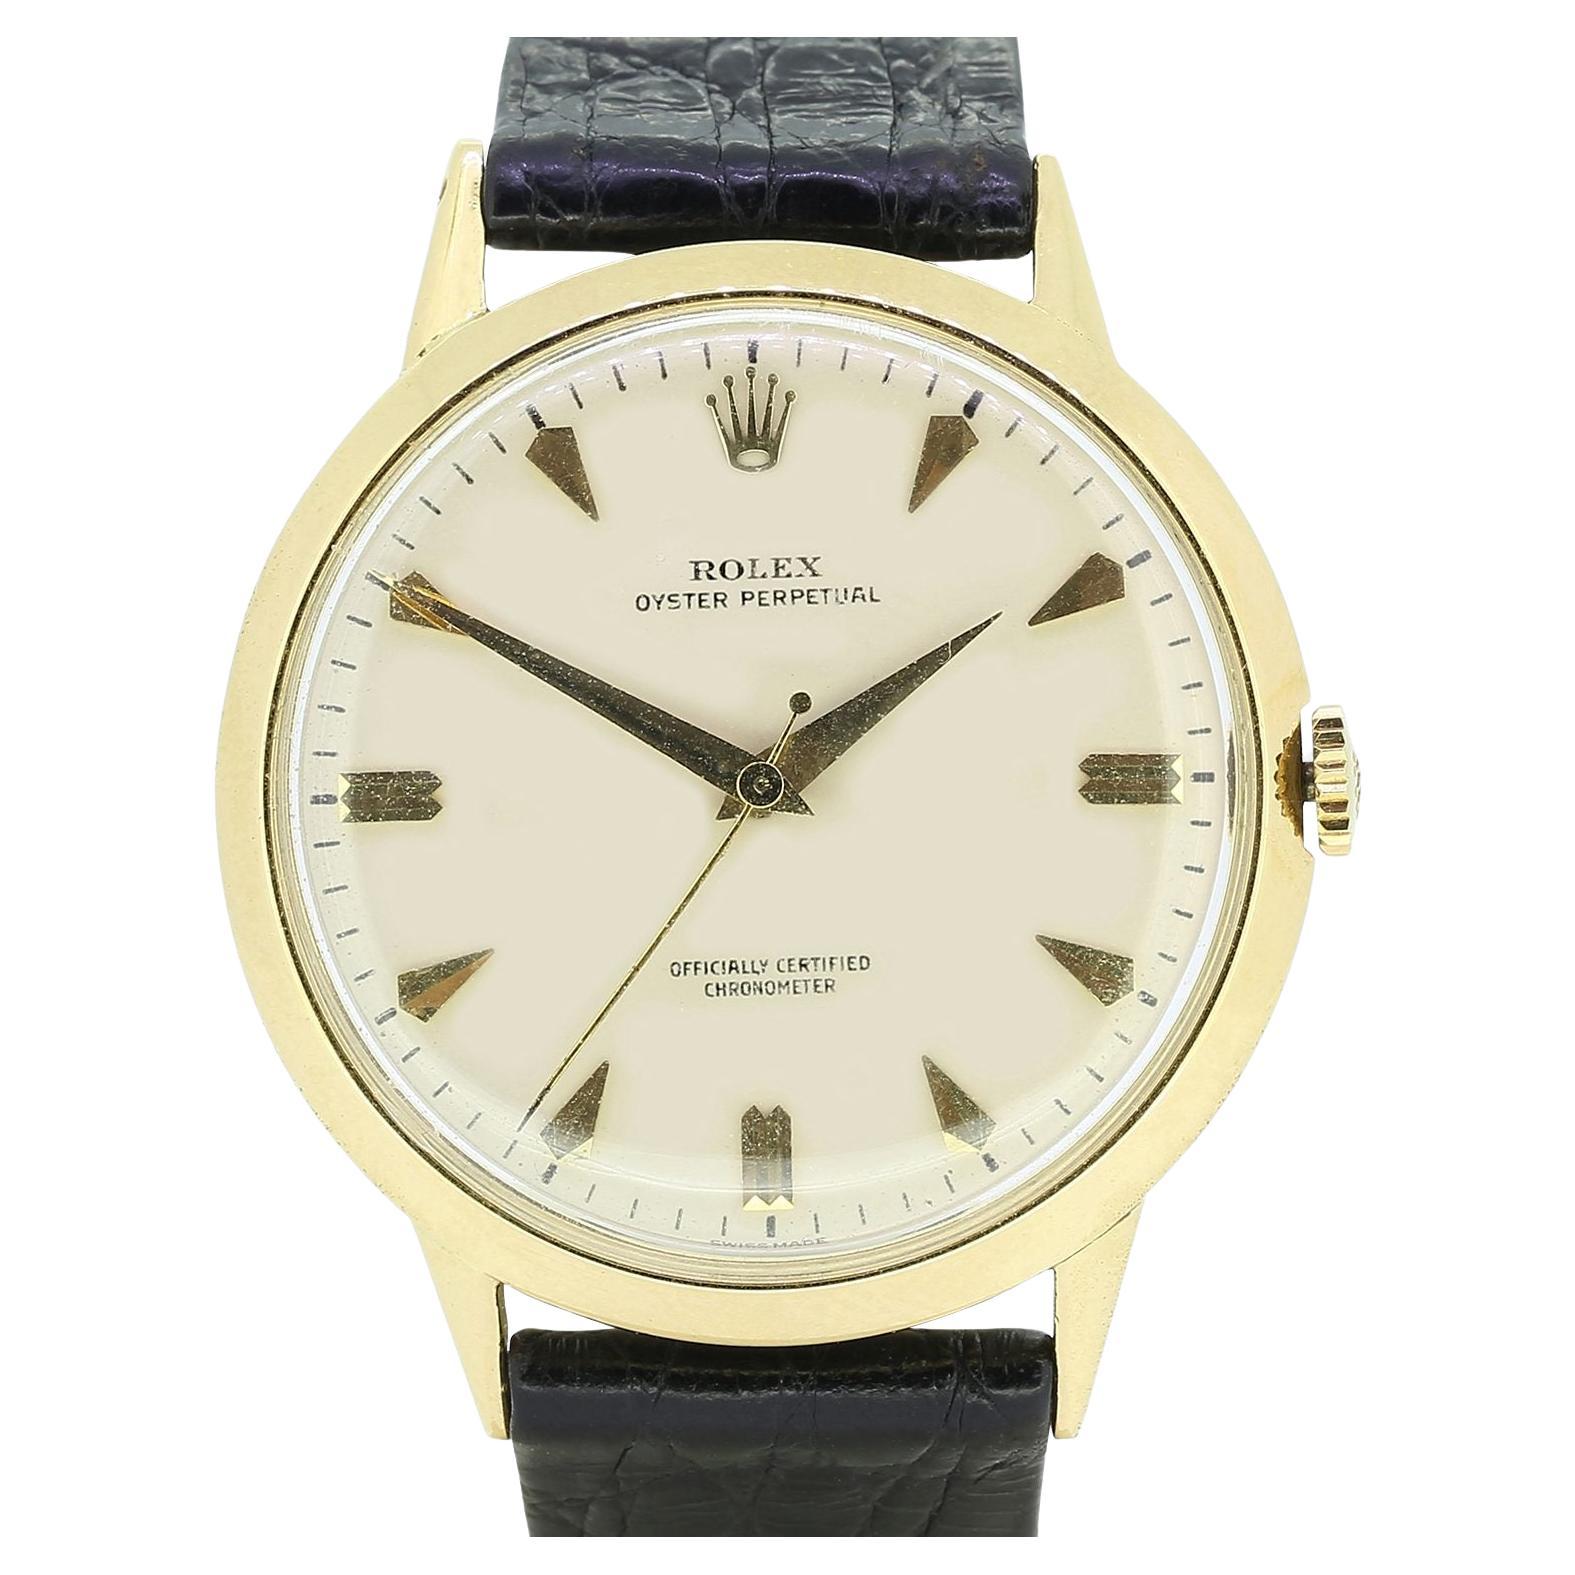 Rolex Oyster Perpetual Gents Armbanduhr, Vintage